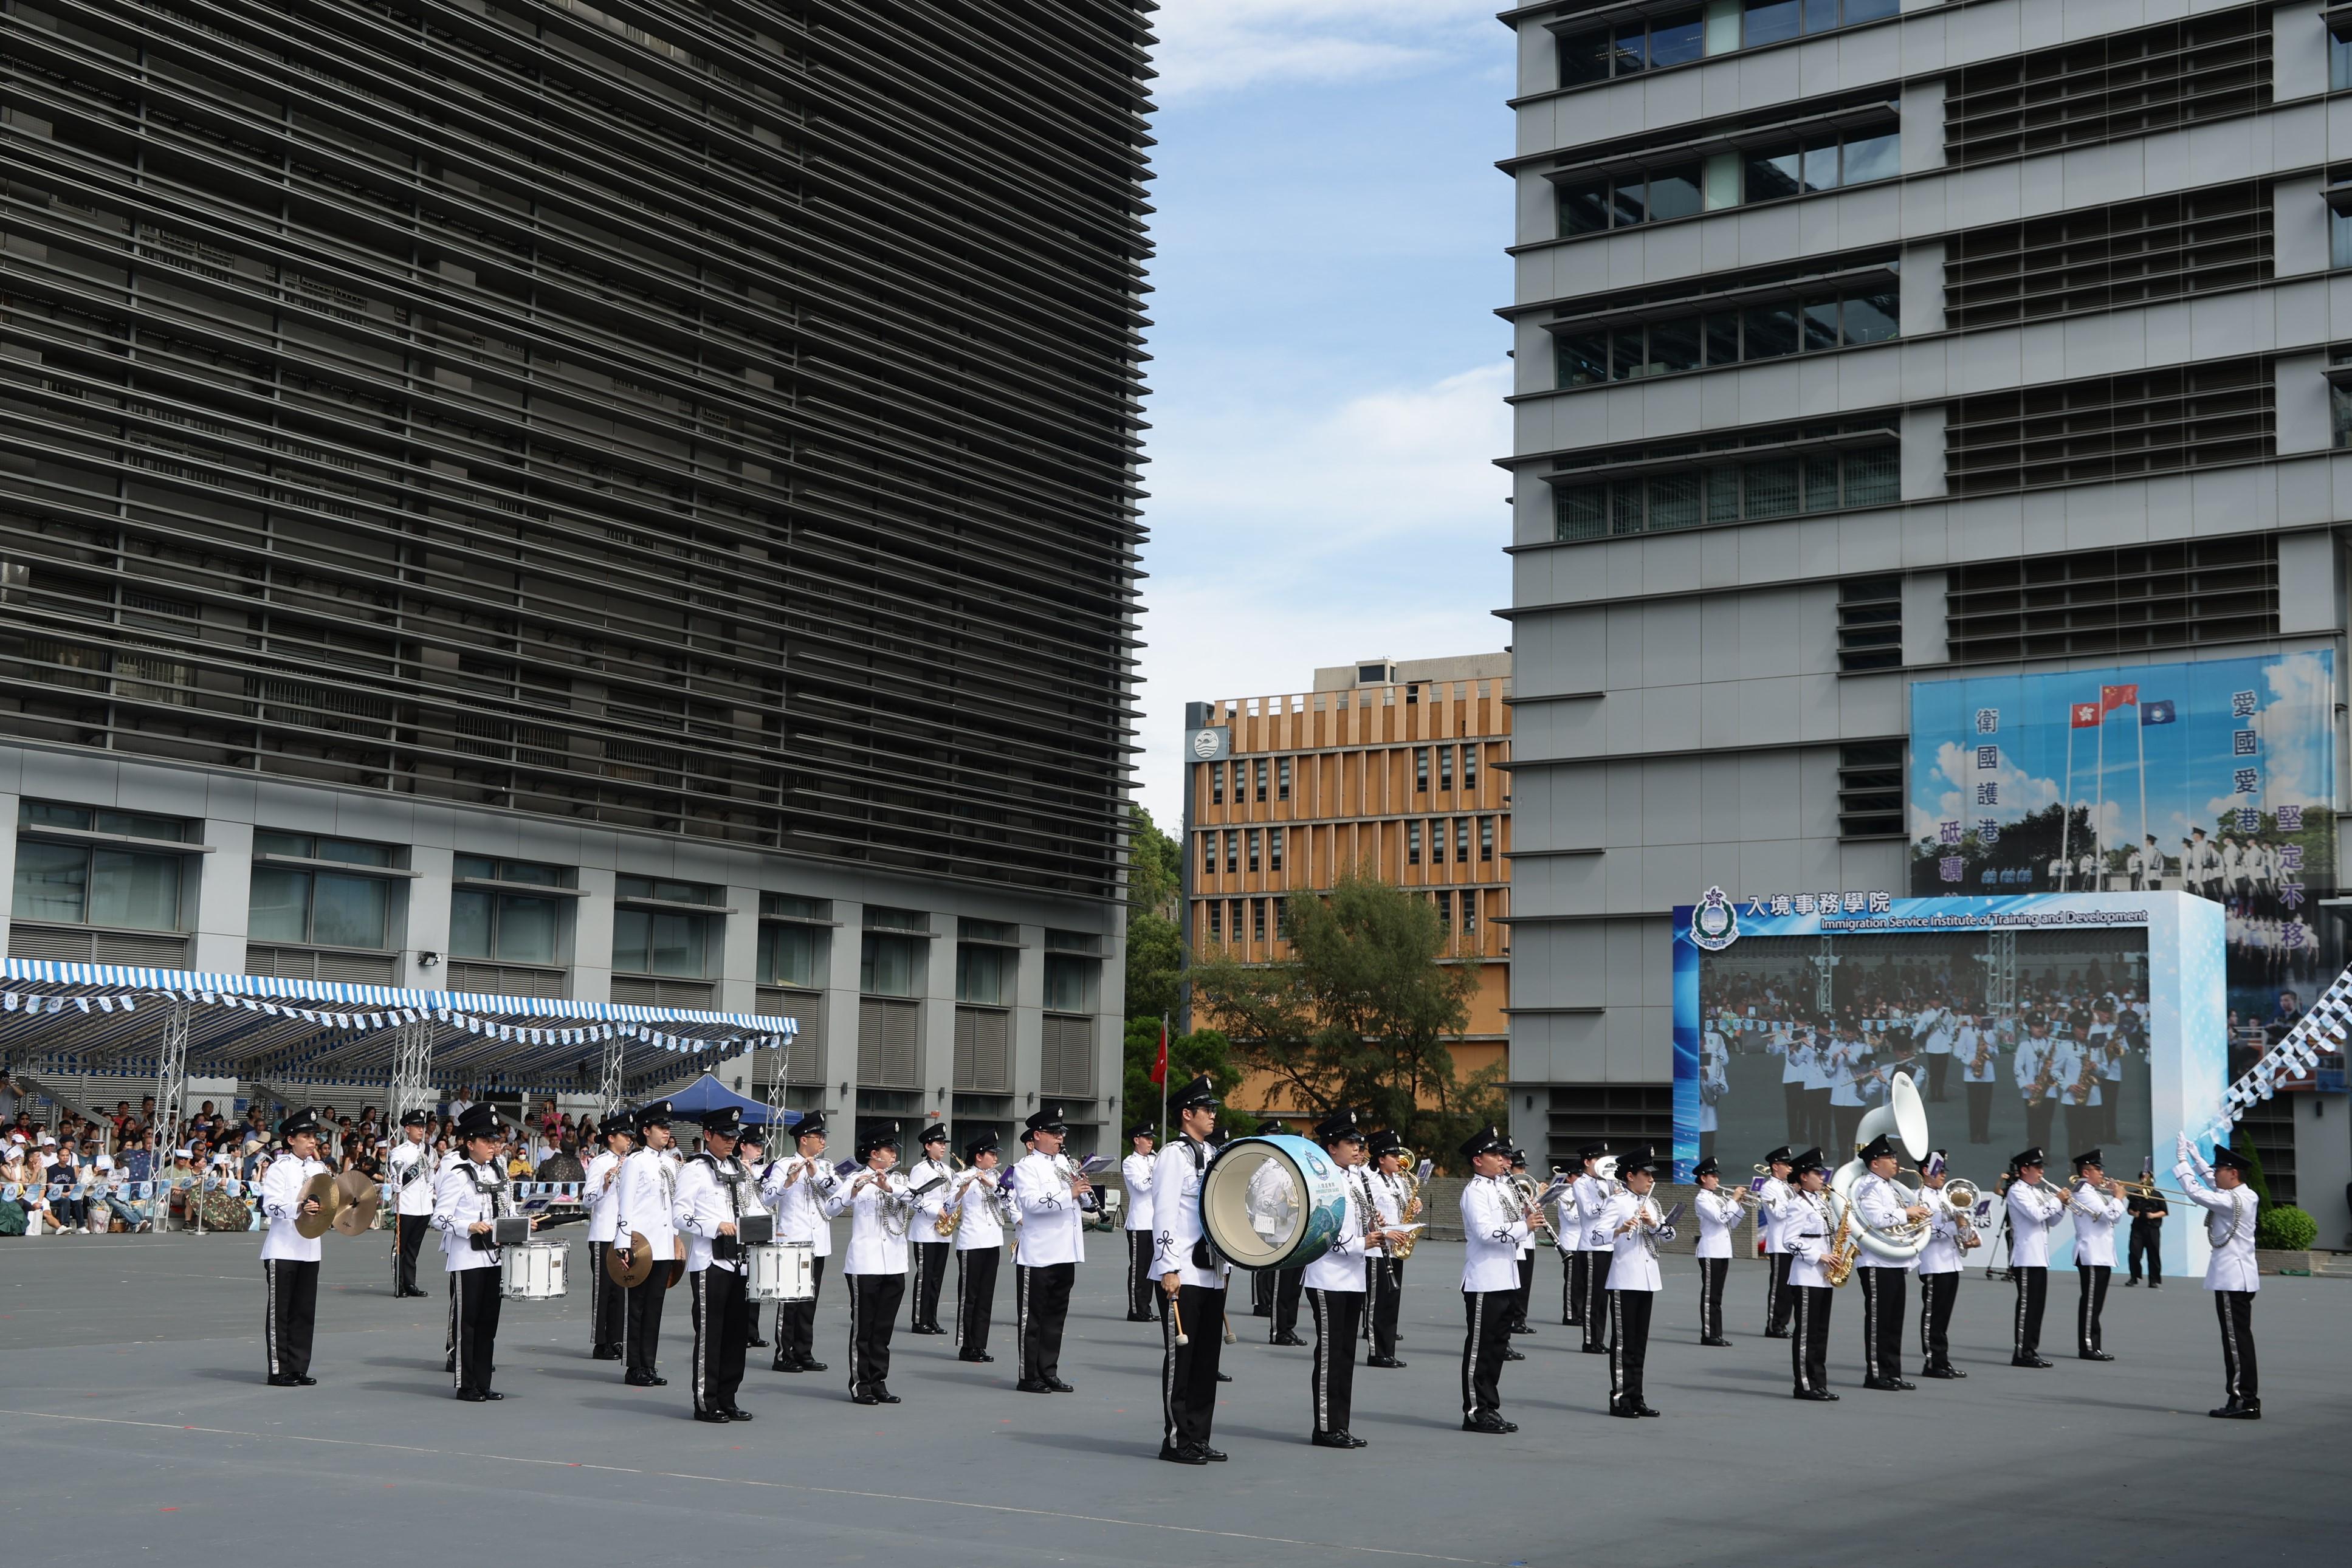 The Immigration Band performs at the Immigration Service Institute of Training and Development Passing-out Parade today (September 13).